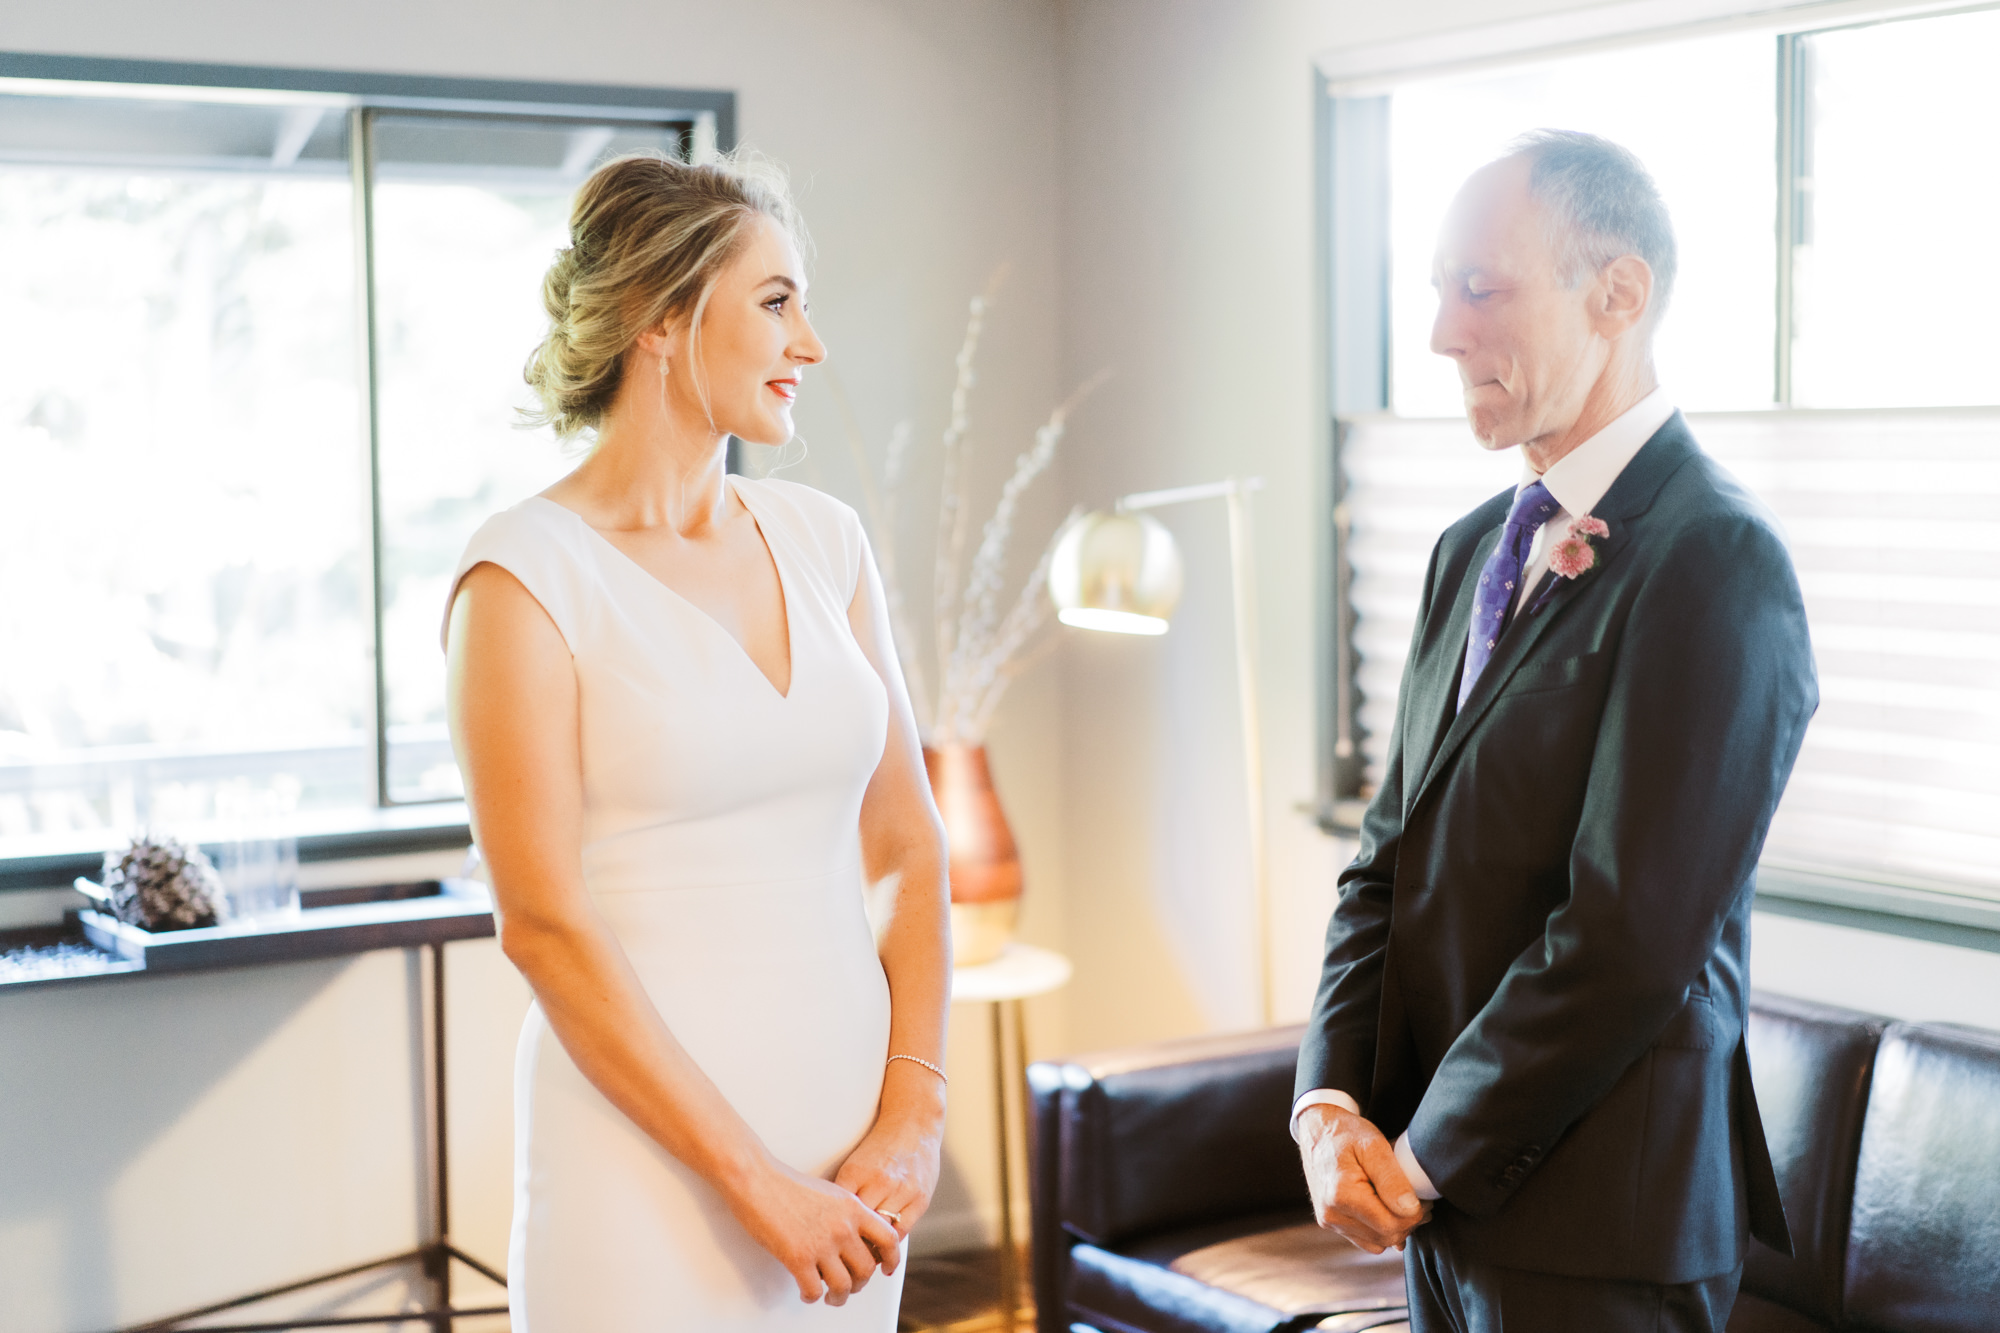 Woodinville wedding photographer: Kayley and dad moment